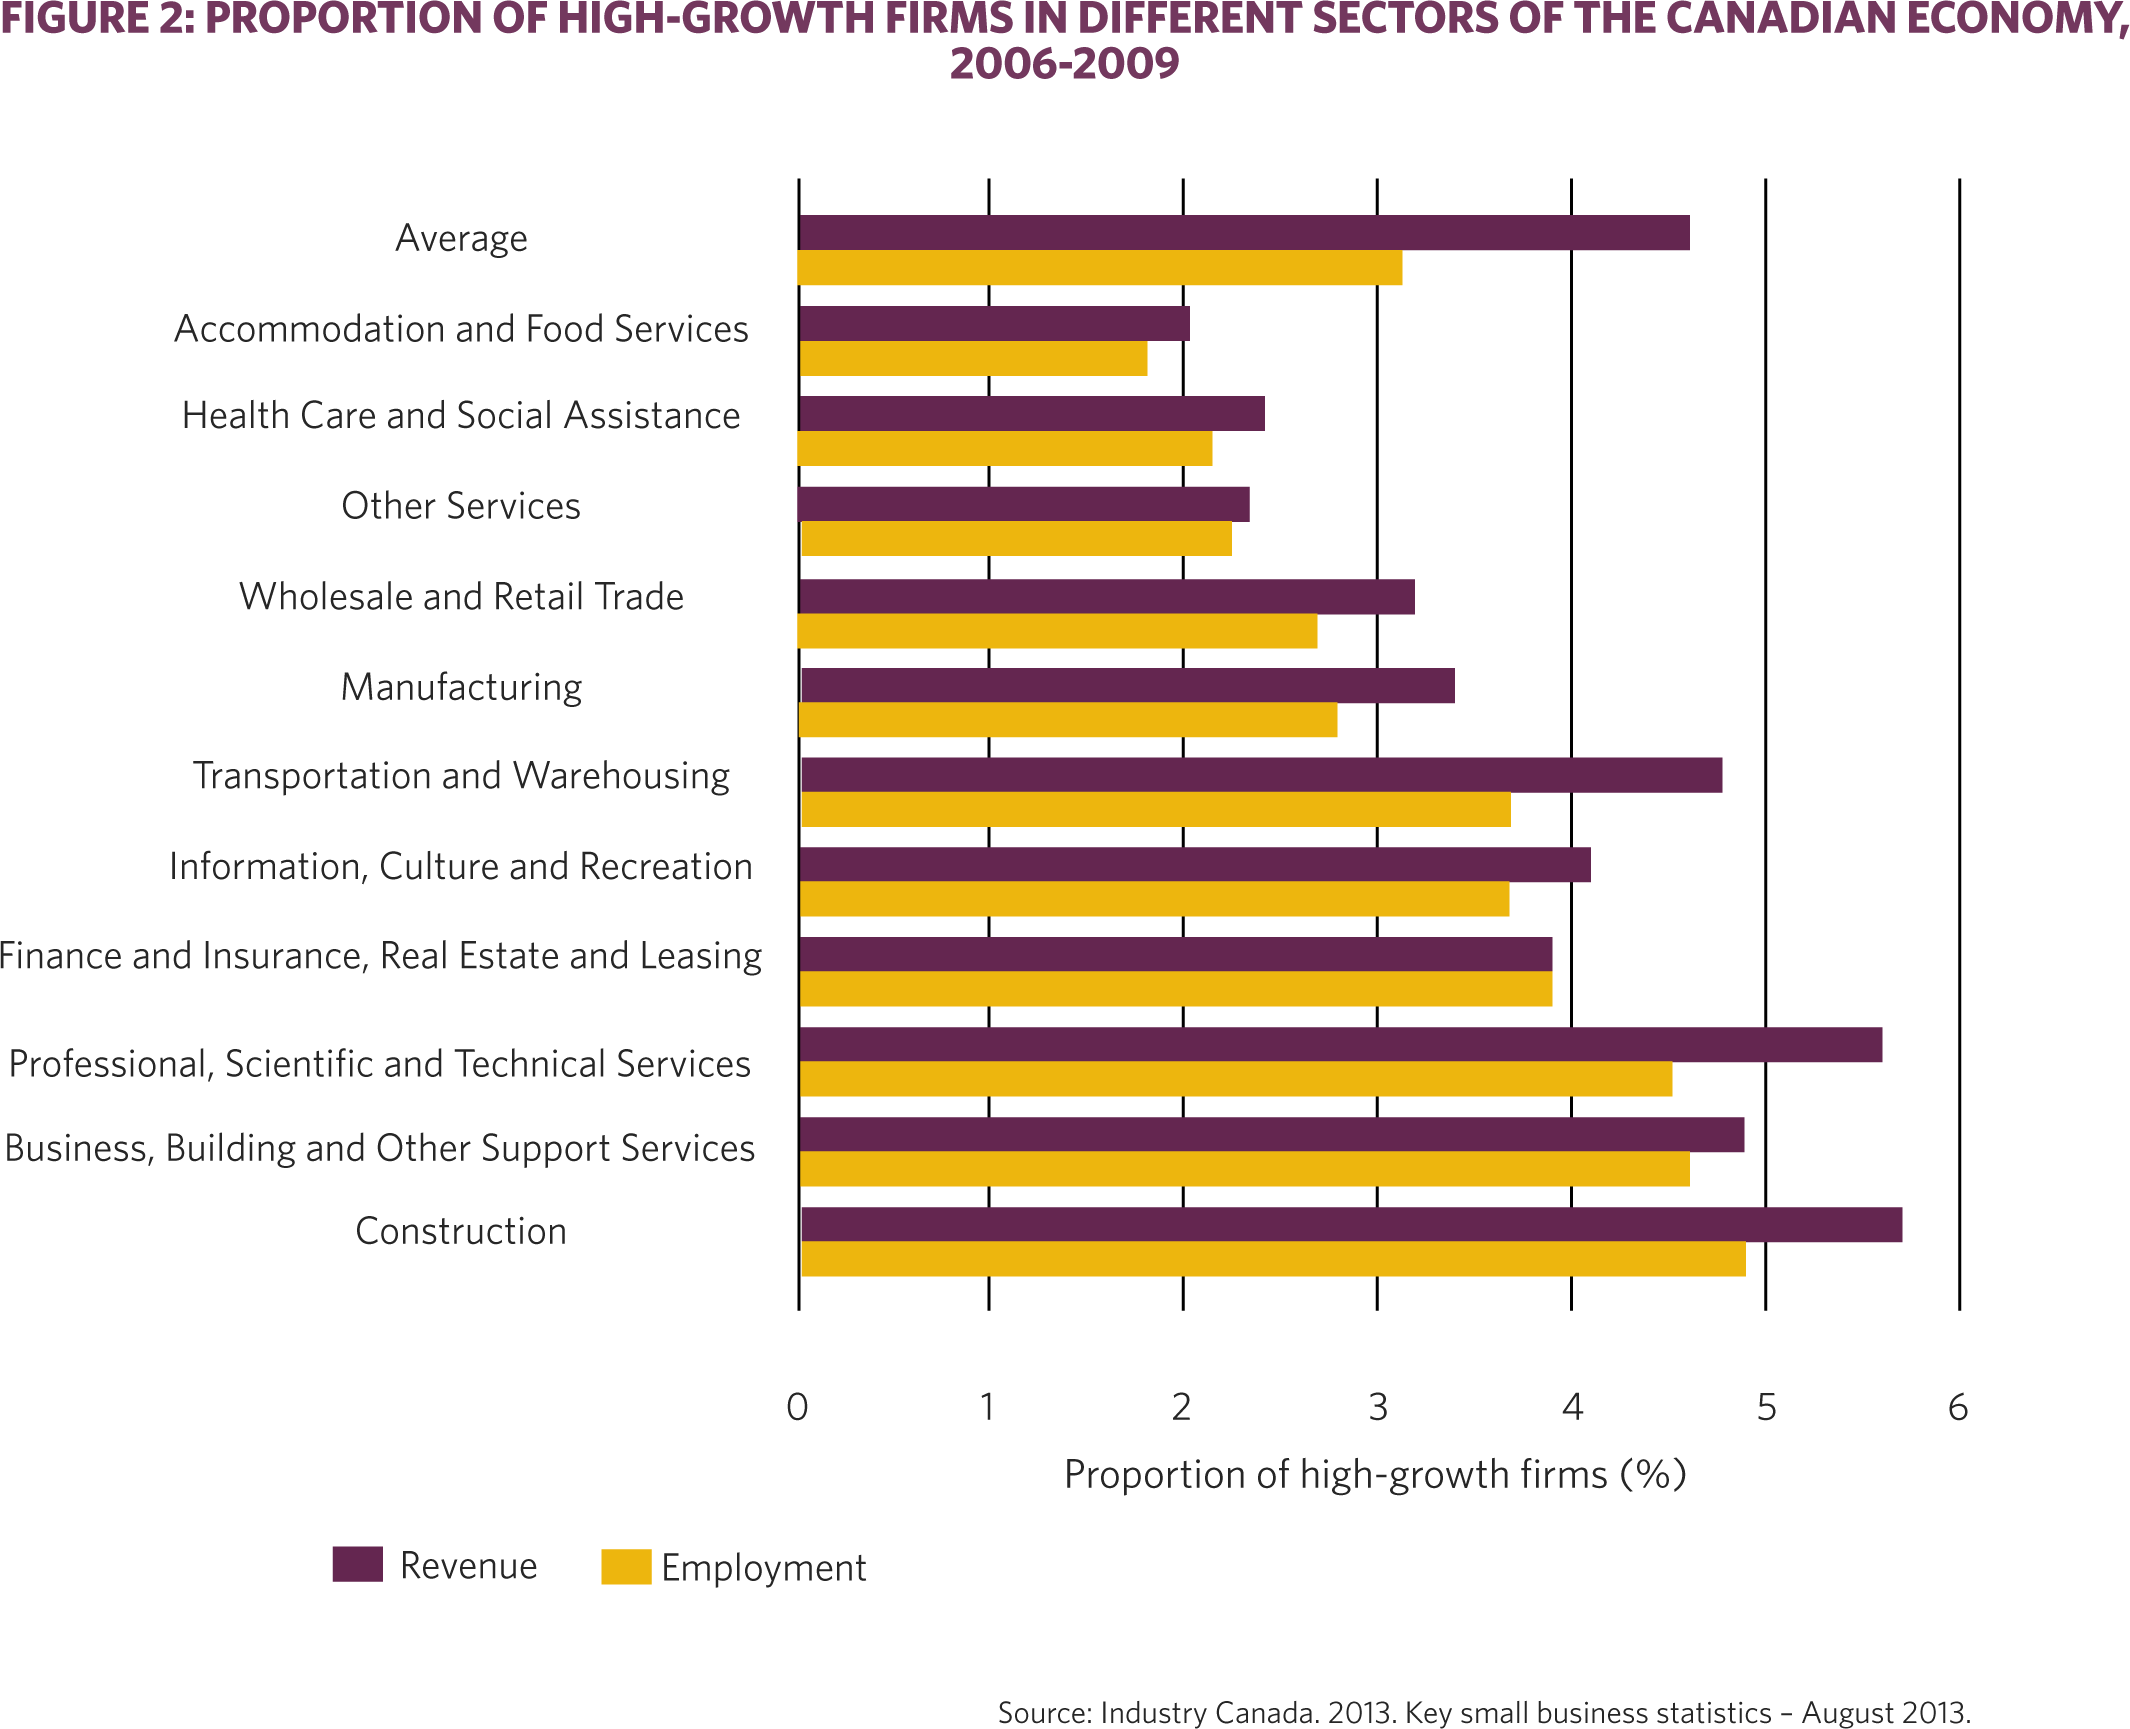 Figure 2: Proportion of high-growth firms in different sectors of the Canadian economy, 2006-2009